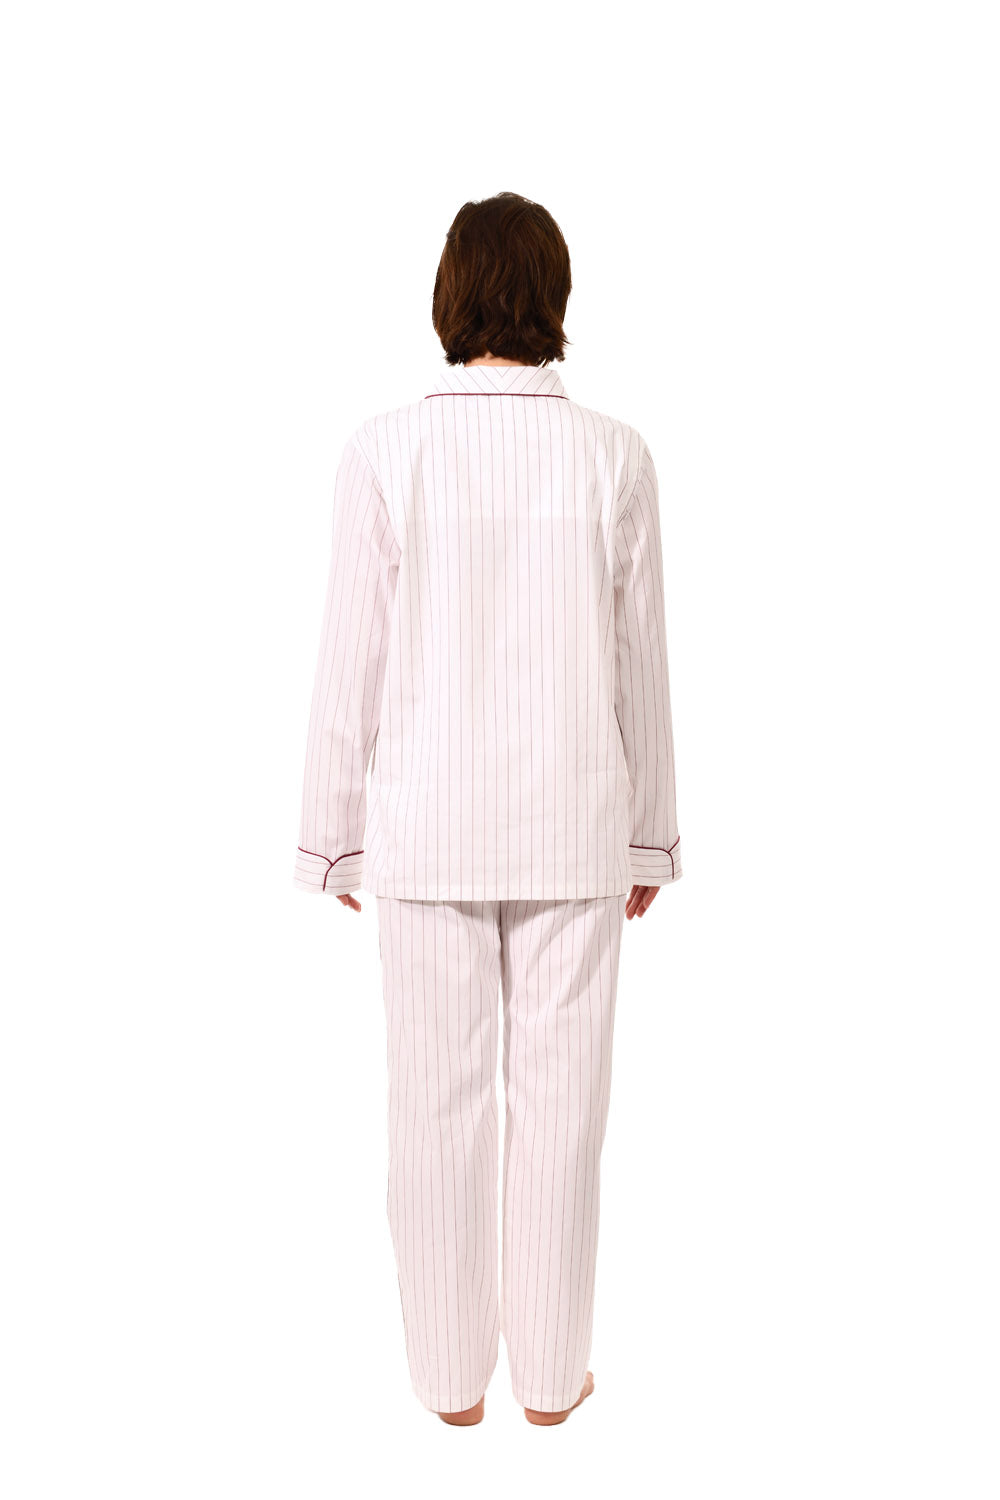 The Waldorf in white striped burgundy cotton broadcloth 